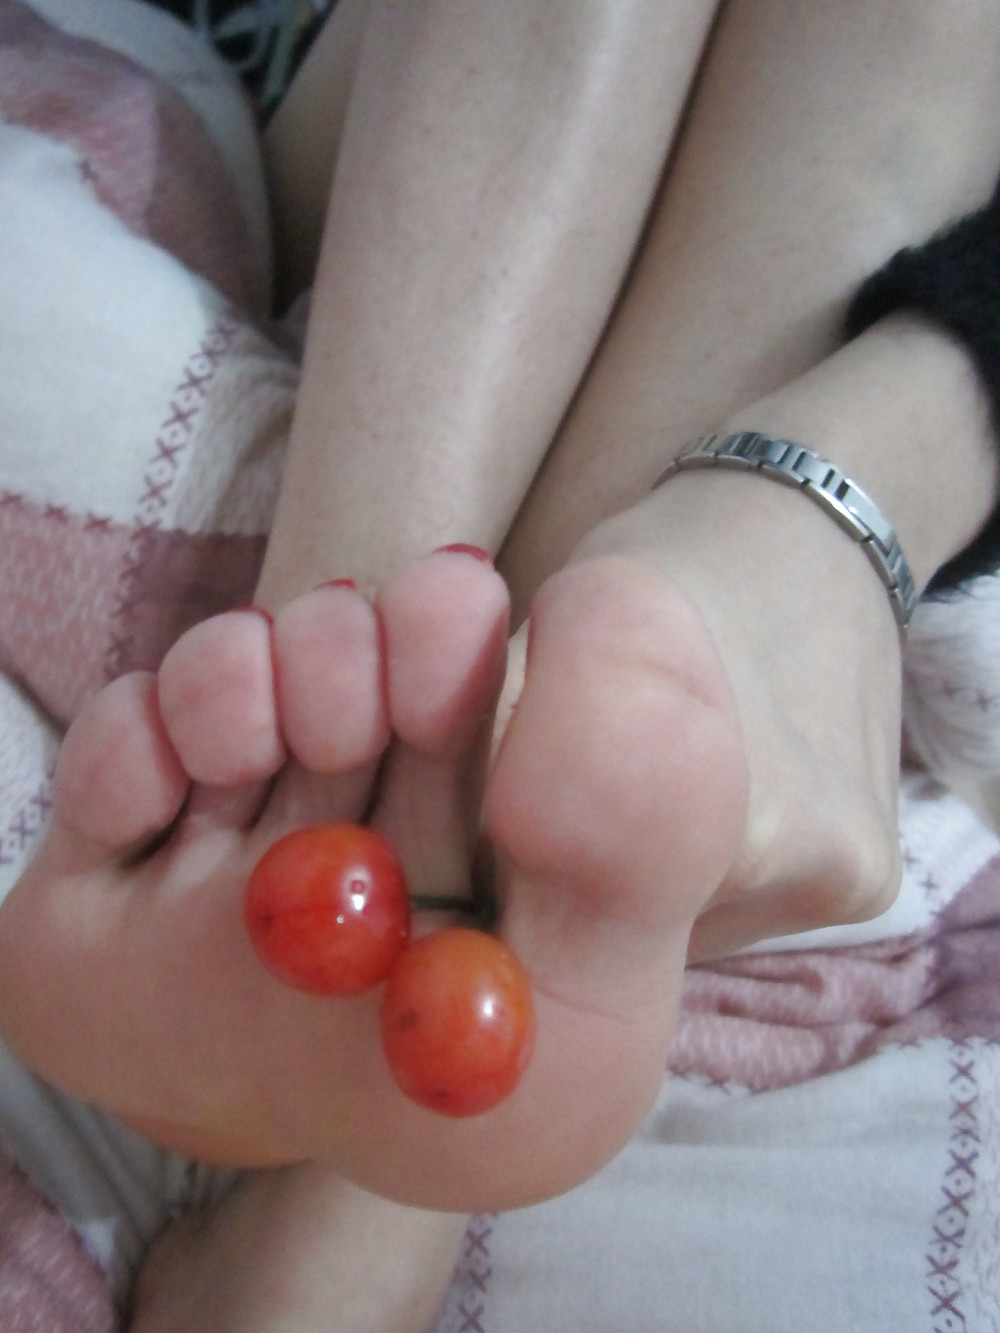 (1) My asian GF's feet, toes and soles! Chinese foot fetish! porn pictures